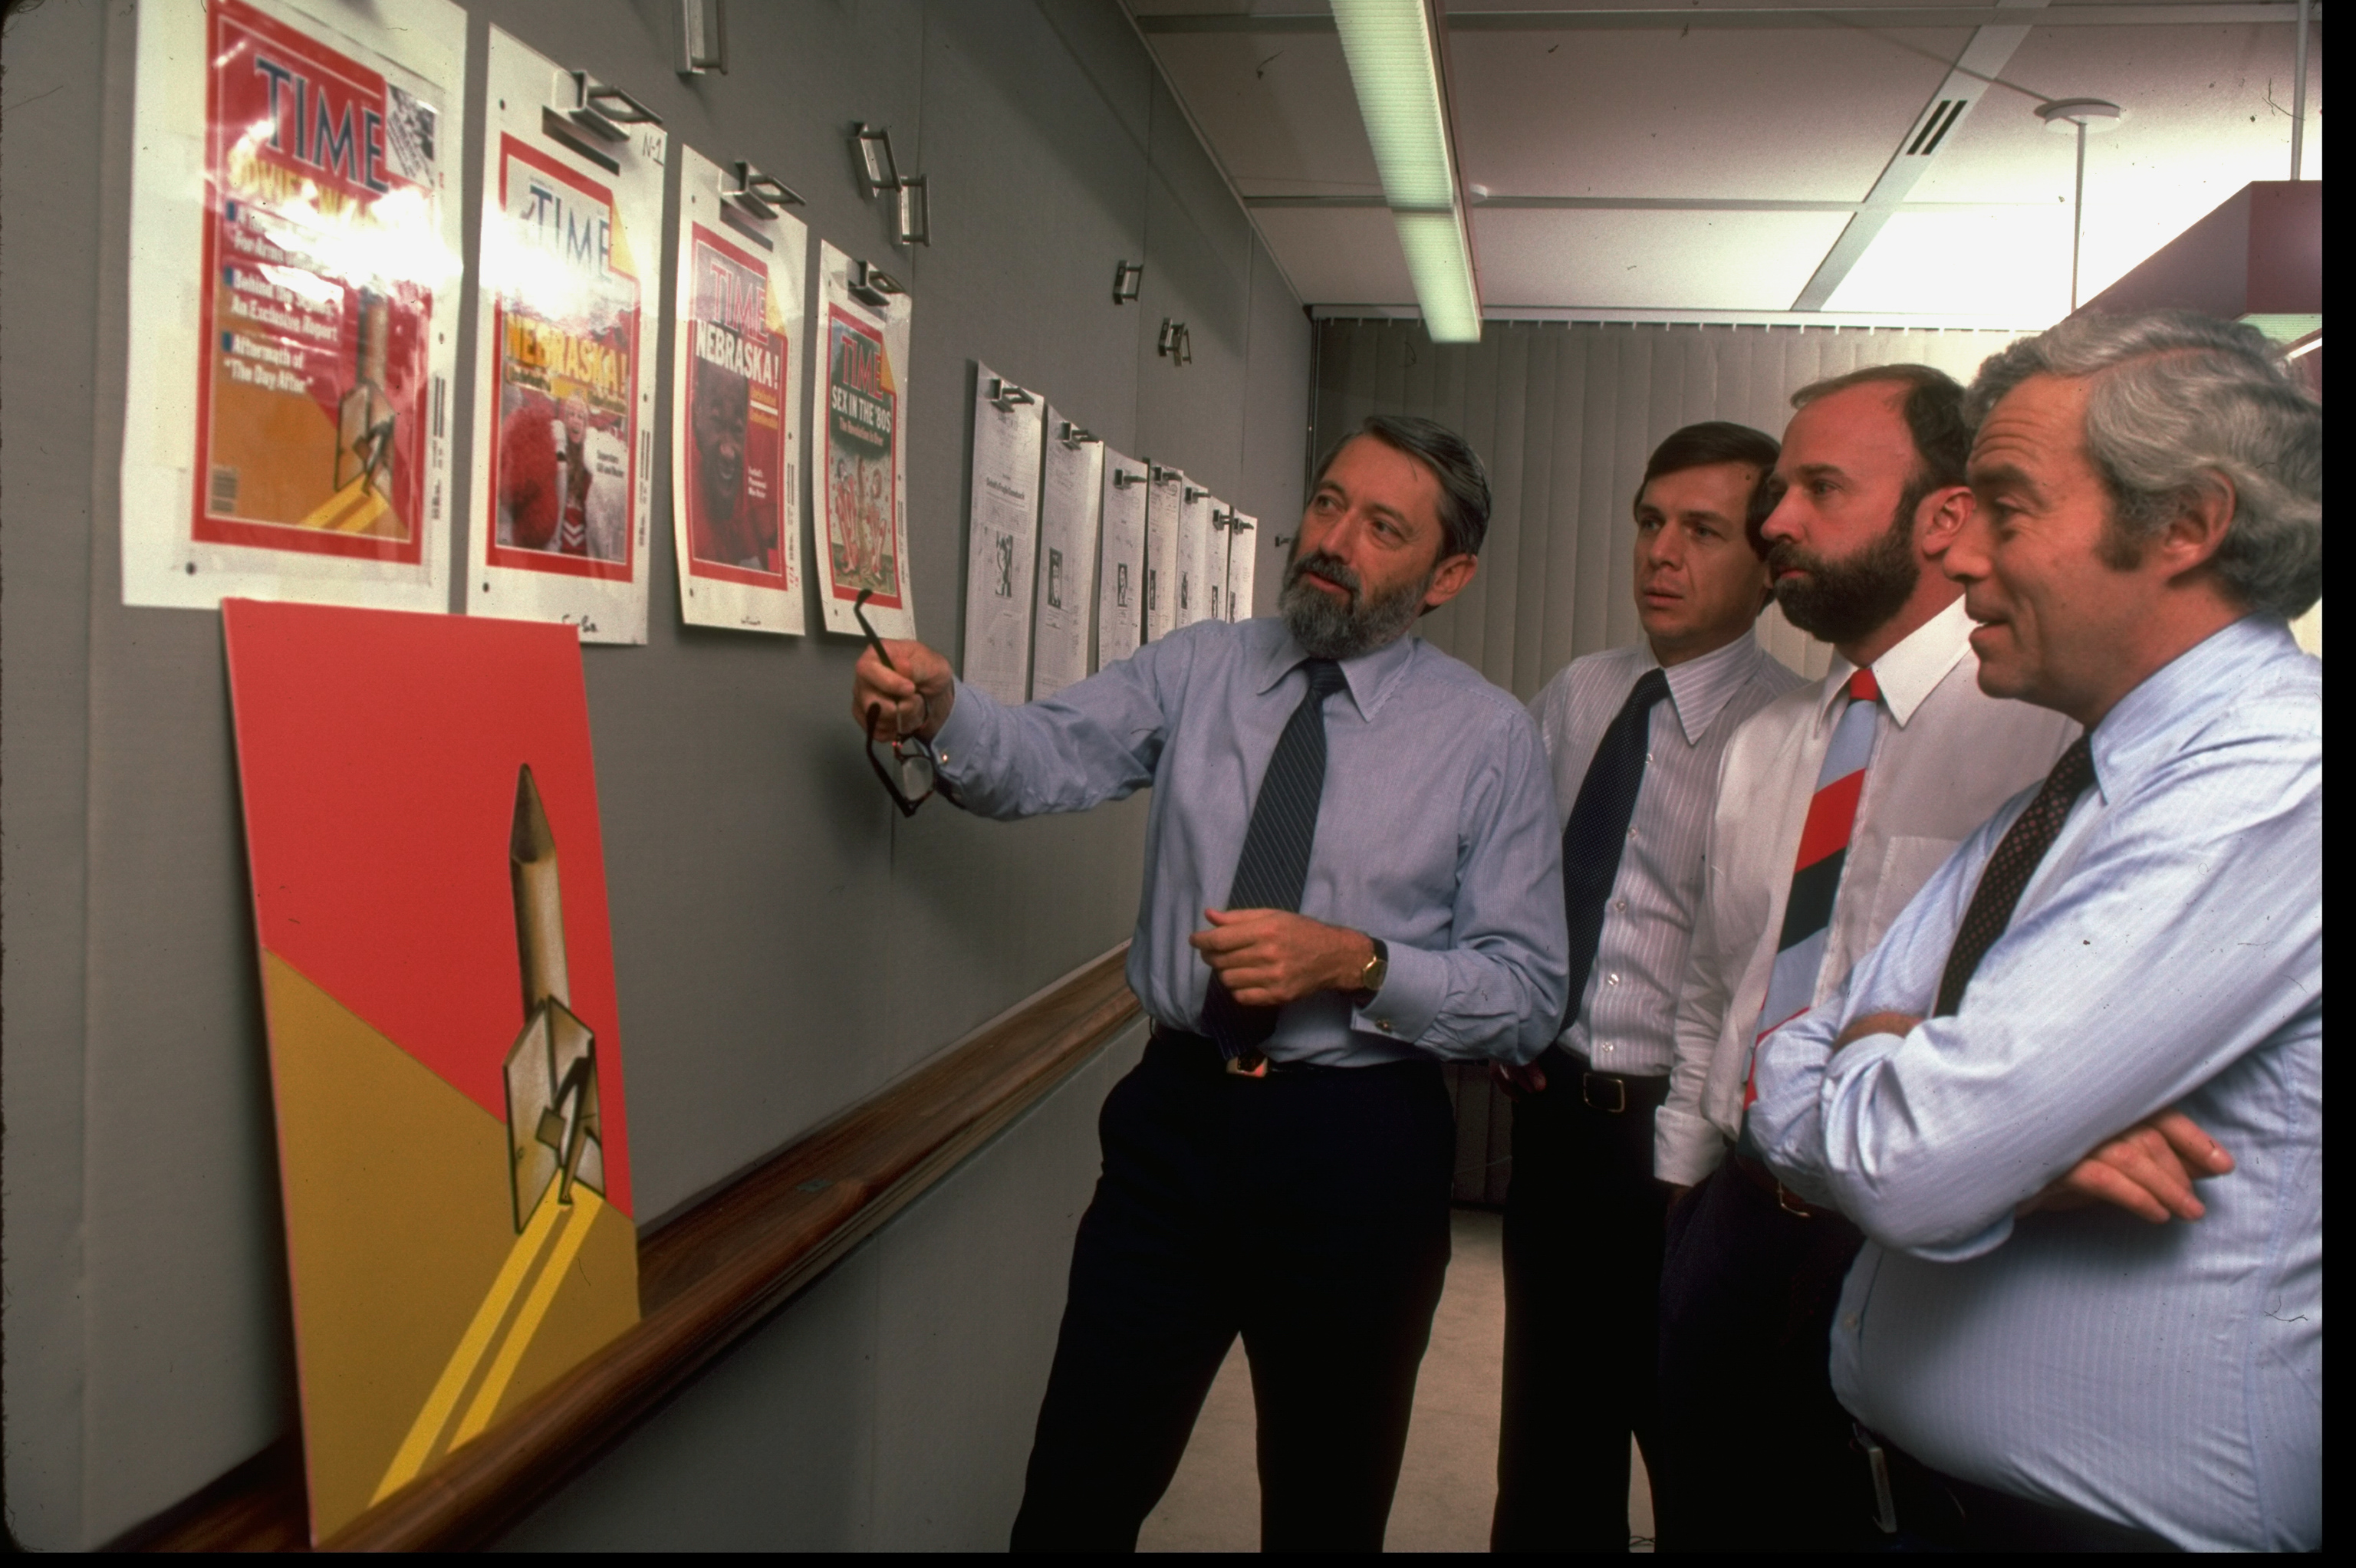 TIME magazine editor Ray Cave (L) examining cover ideas with other editors in 1983 (Henry Groskinsky—The LIFE Images Collection via Getty Images)